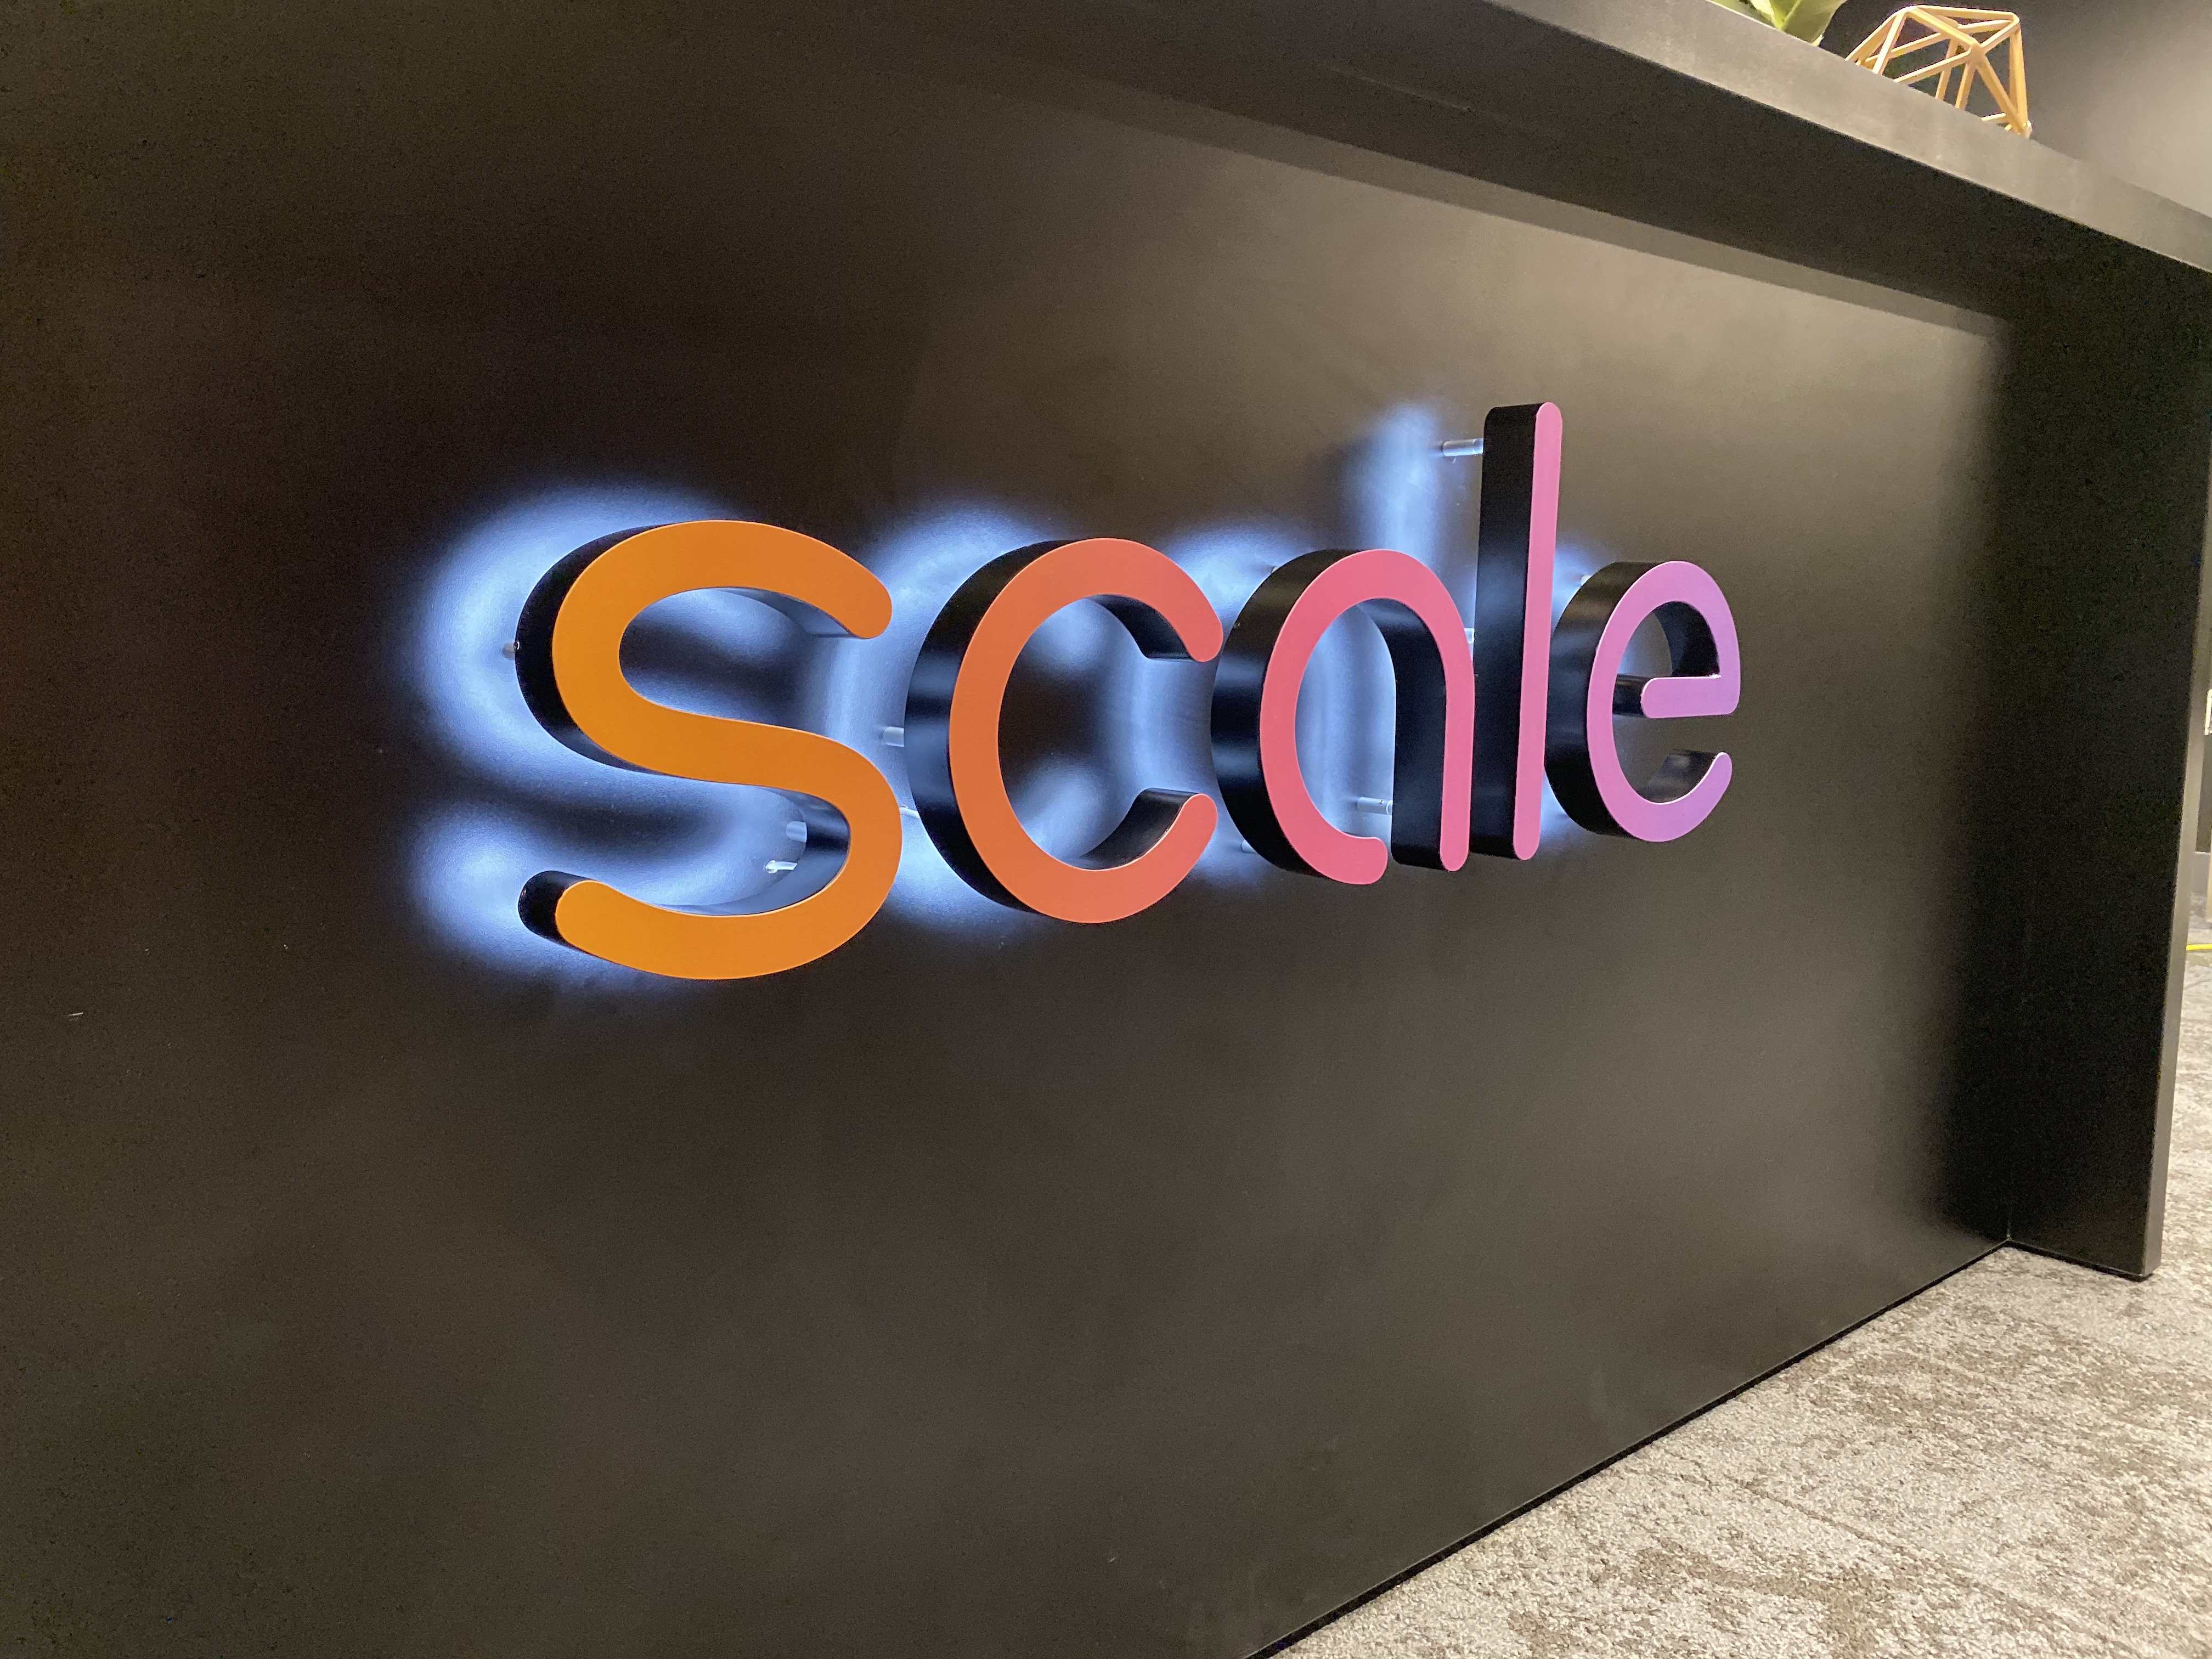 Gradient, halo-lit / back-lit illuminated sign on reception desk in the lobby of Scale, a San Francisco based company delivering high quality training data for AI applications such as self-driving cars, mapping, AR/VR, robotics, and more.